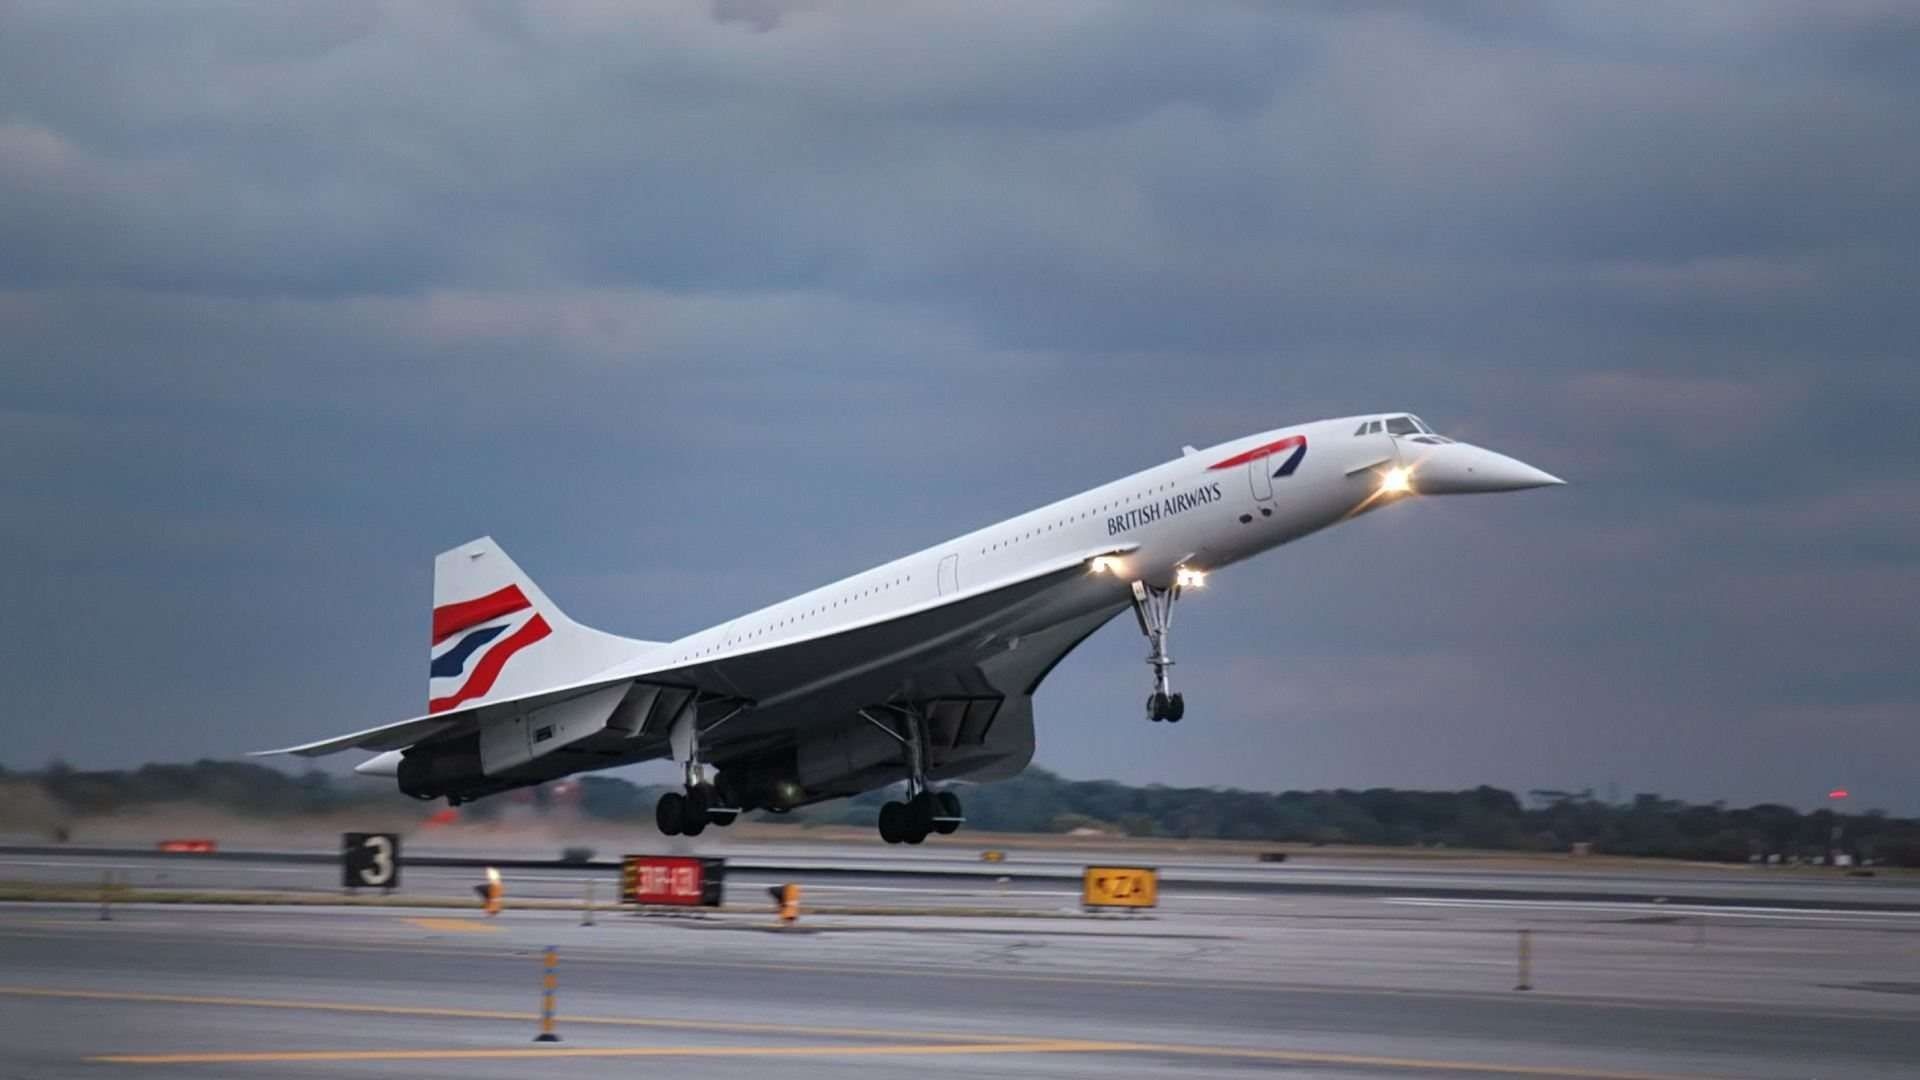 Concorde Wallpapers - Top Free Concorde Backgrounds 1920x1080